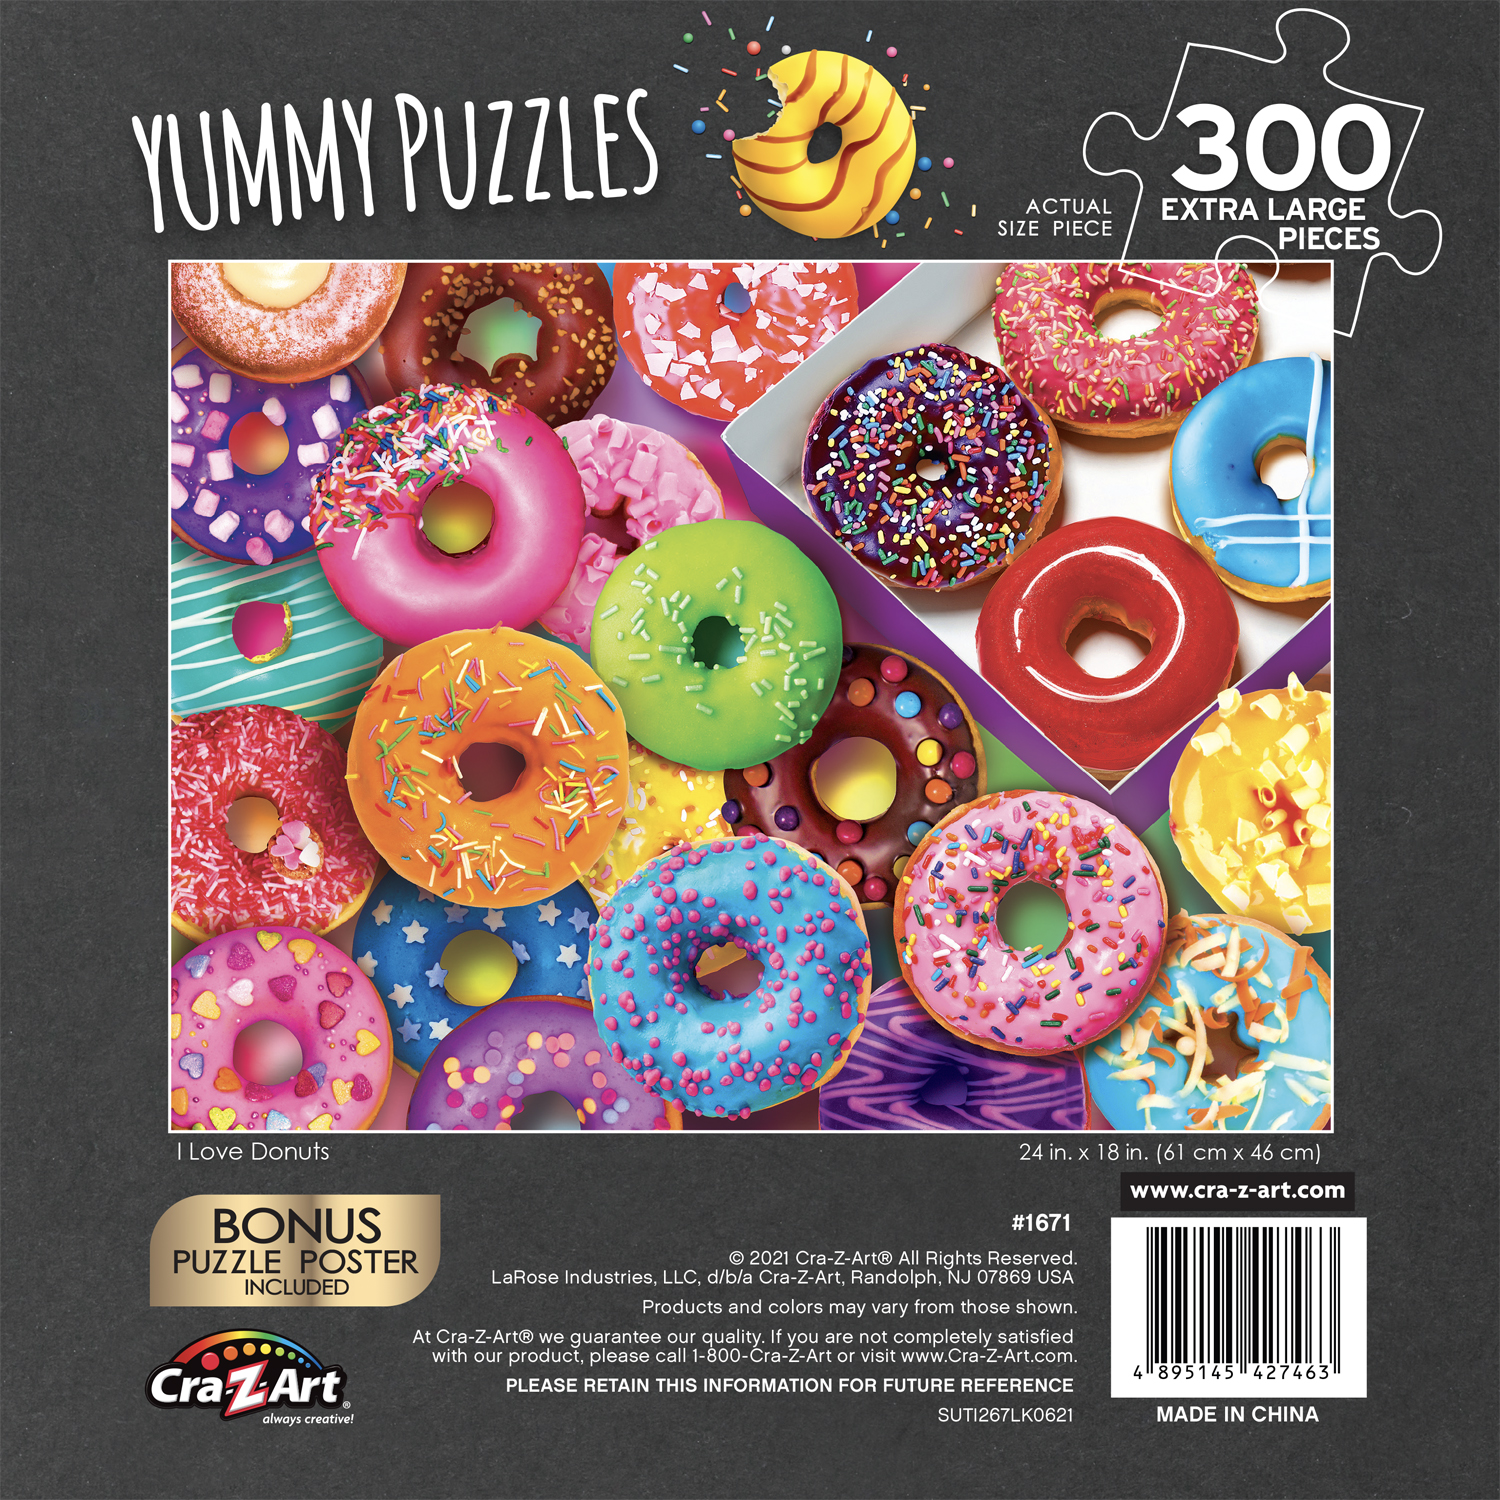 Cra-Z-Art Yummy Puzzles 300-Piece I Love Donuts Jigsaw Puzzle - image 2 of 6